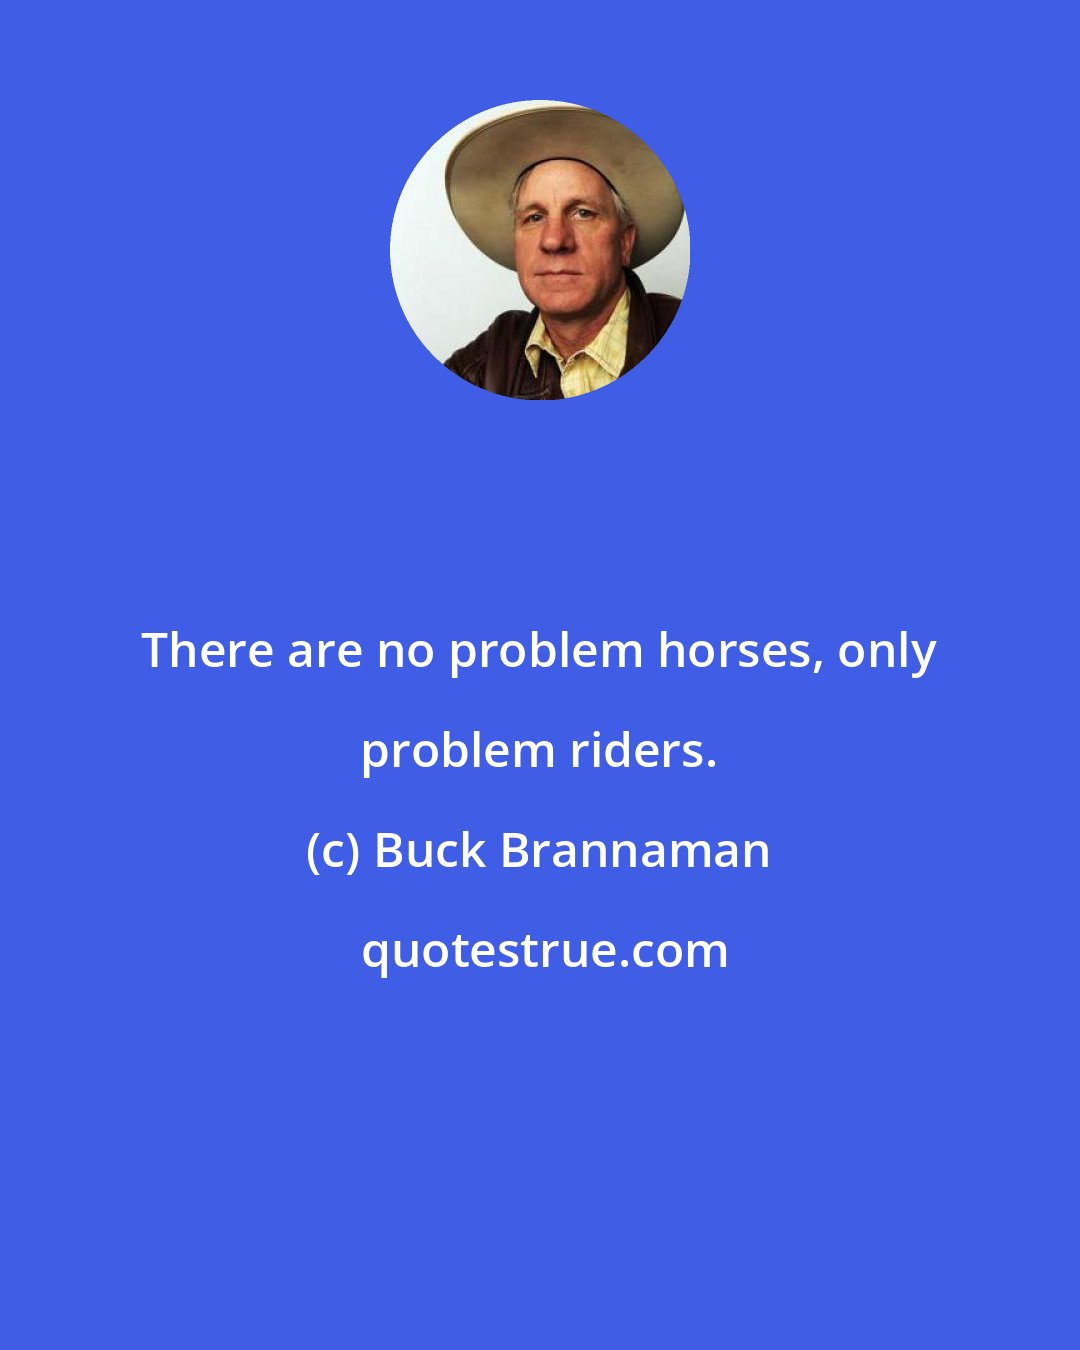 Buck Brannaman: There are no problem horses, only problem riders.